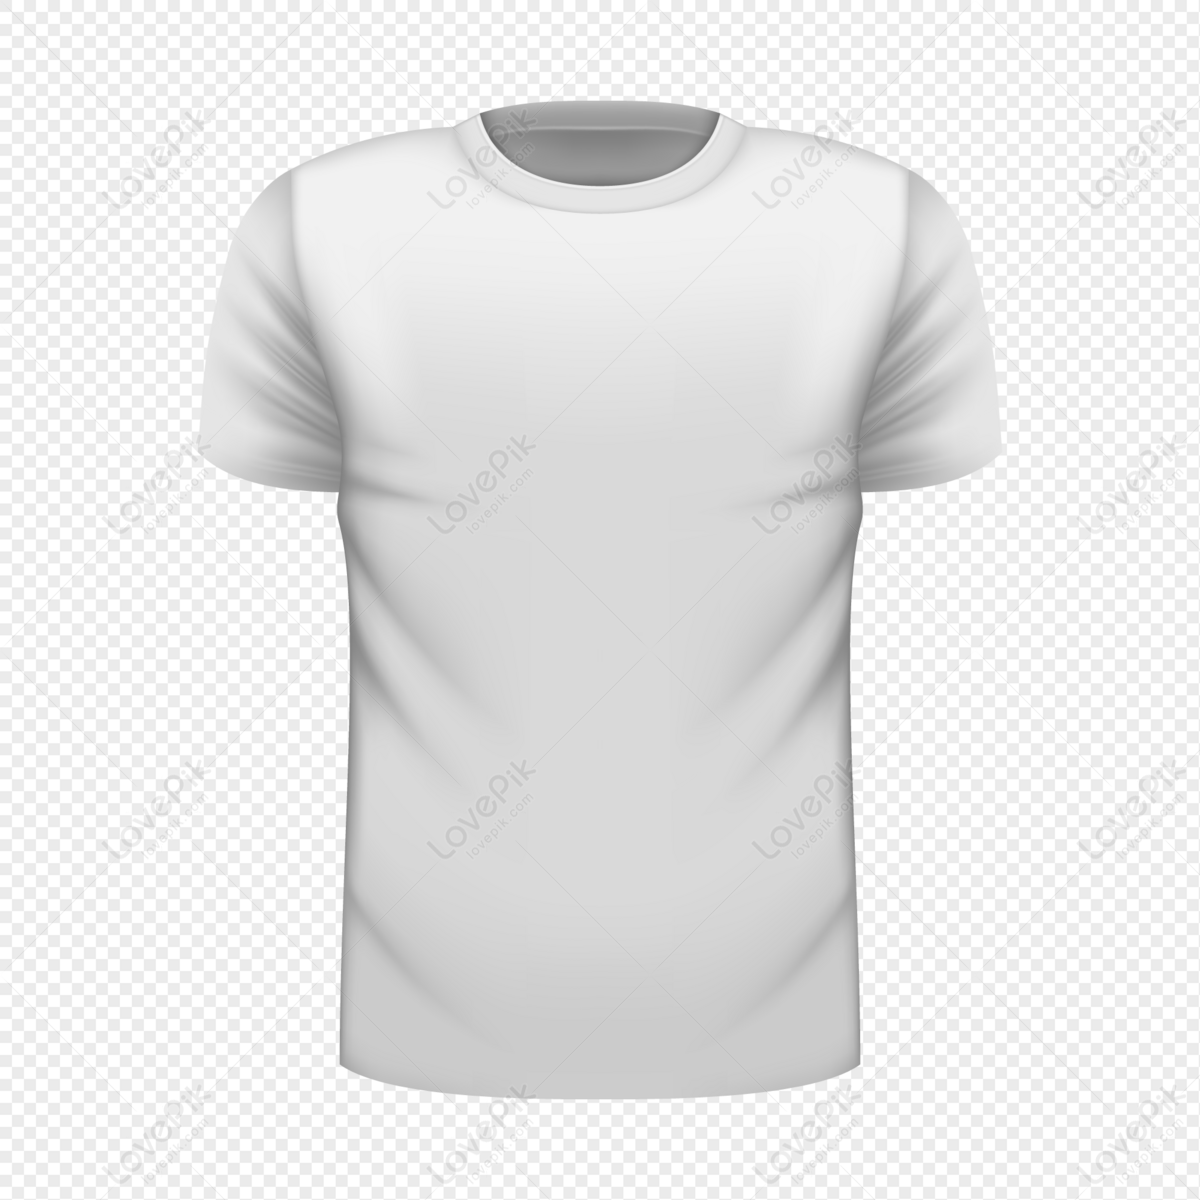 White T Shirt Png Transparent Image And Clipart Image For Free Download -  Lovepik | 401527047